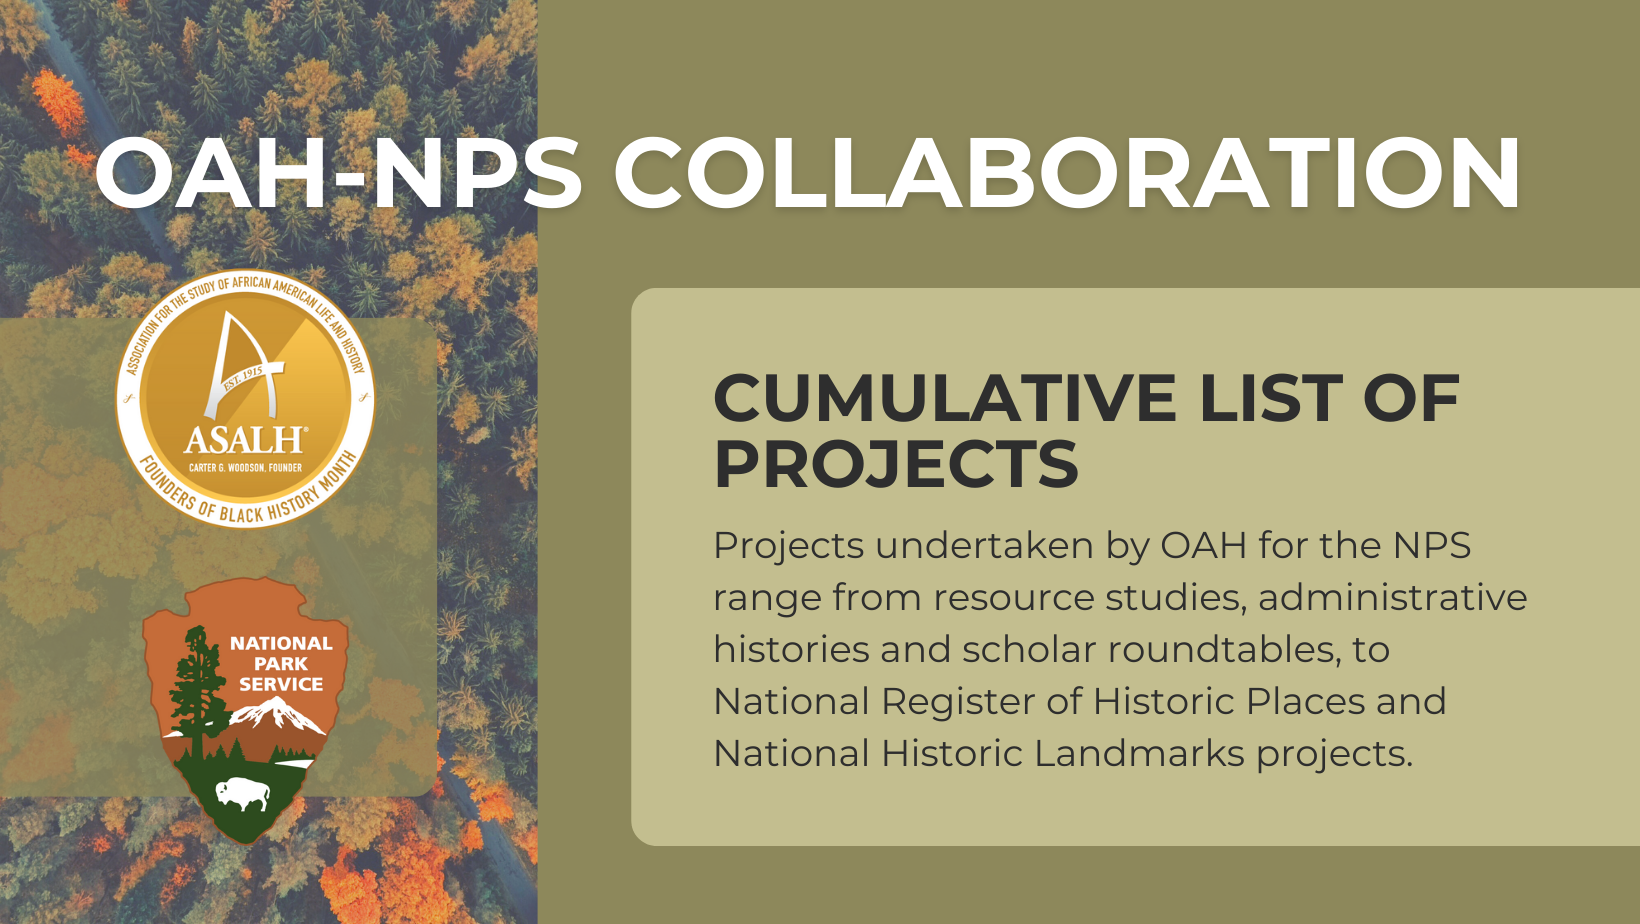 Cumulative List of Projects: Projects undertaken by OAH for the NPS range from resource studies, administrative histories and scholar roundtables, to National Register of Historic Places and National Historic Landmarks projects.